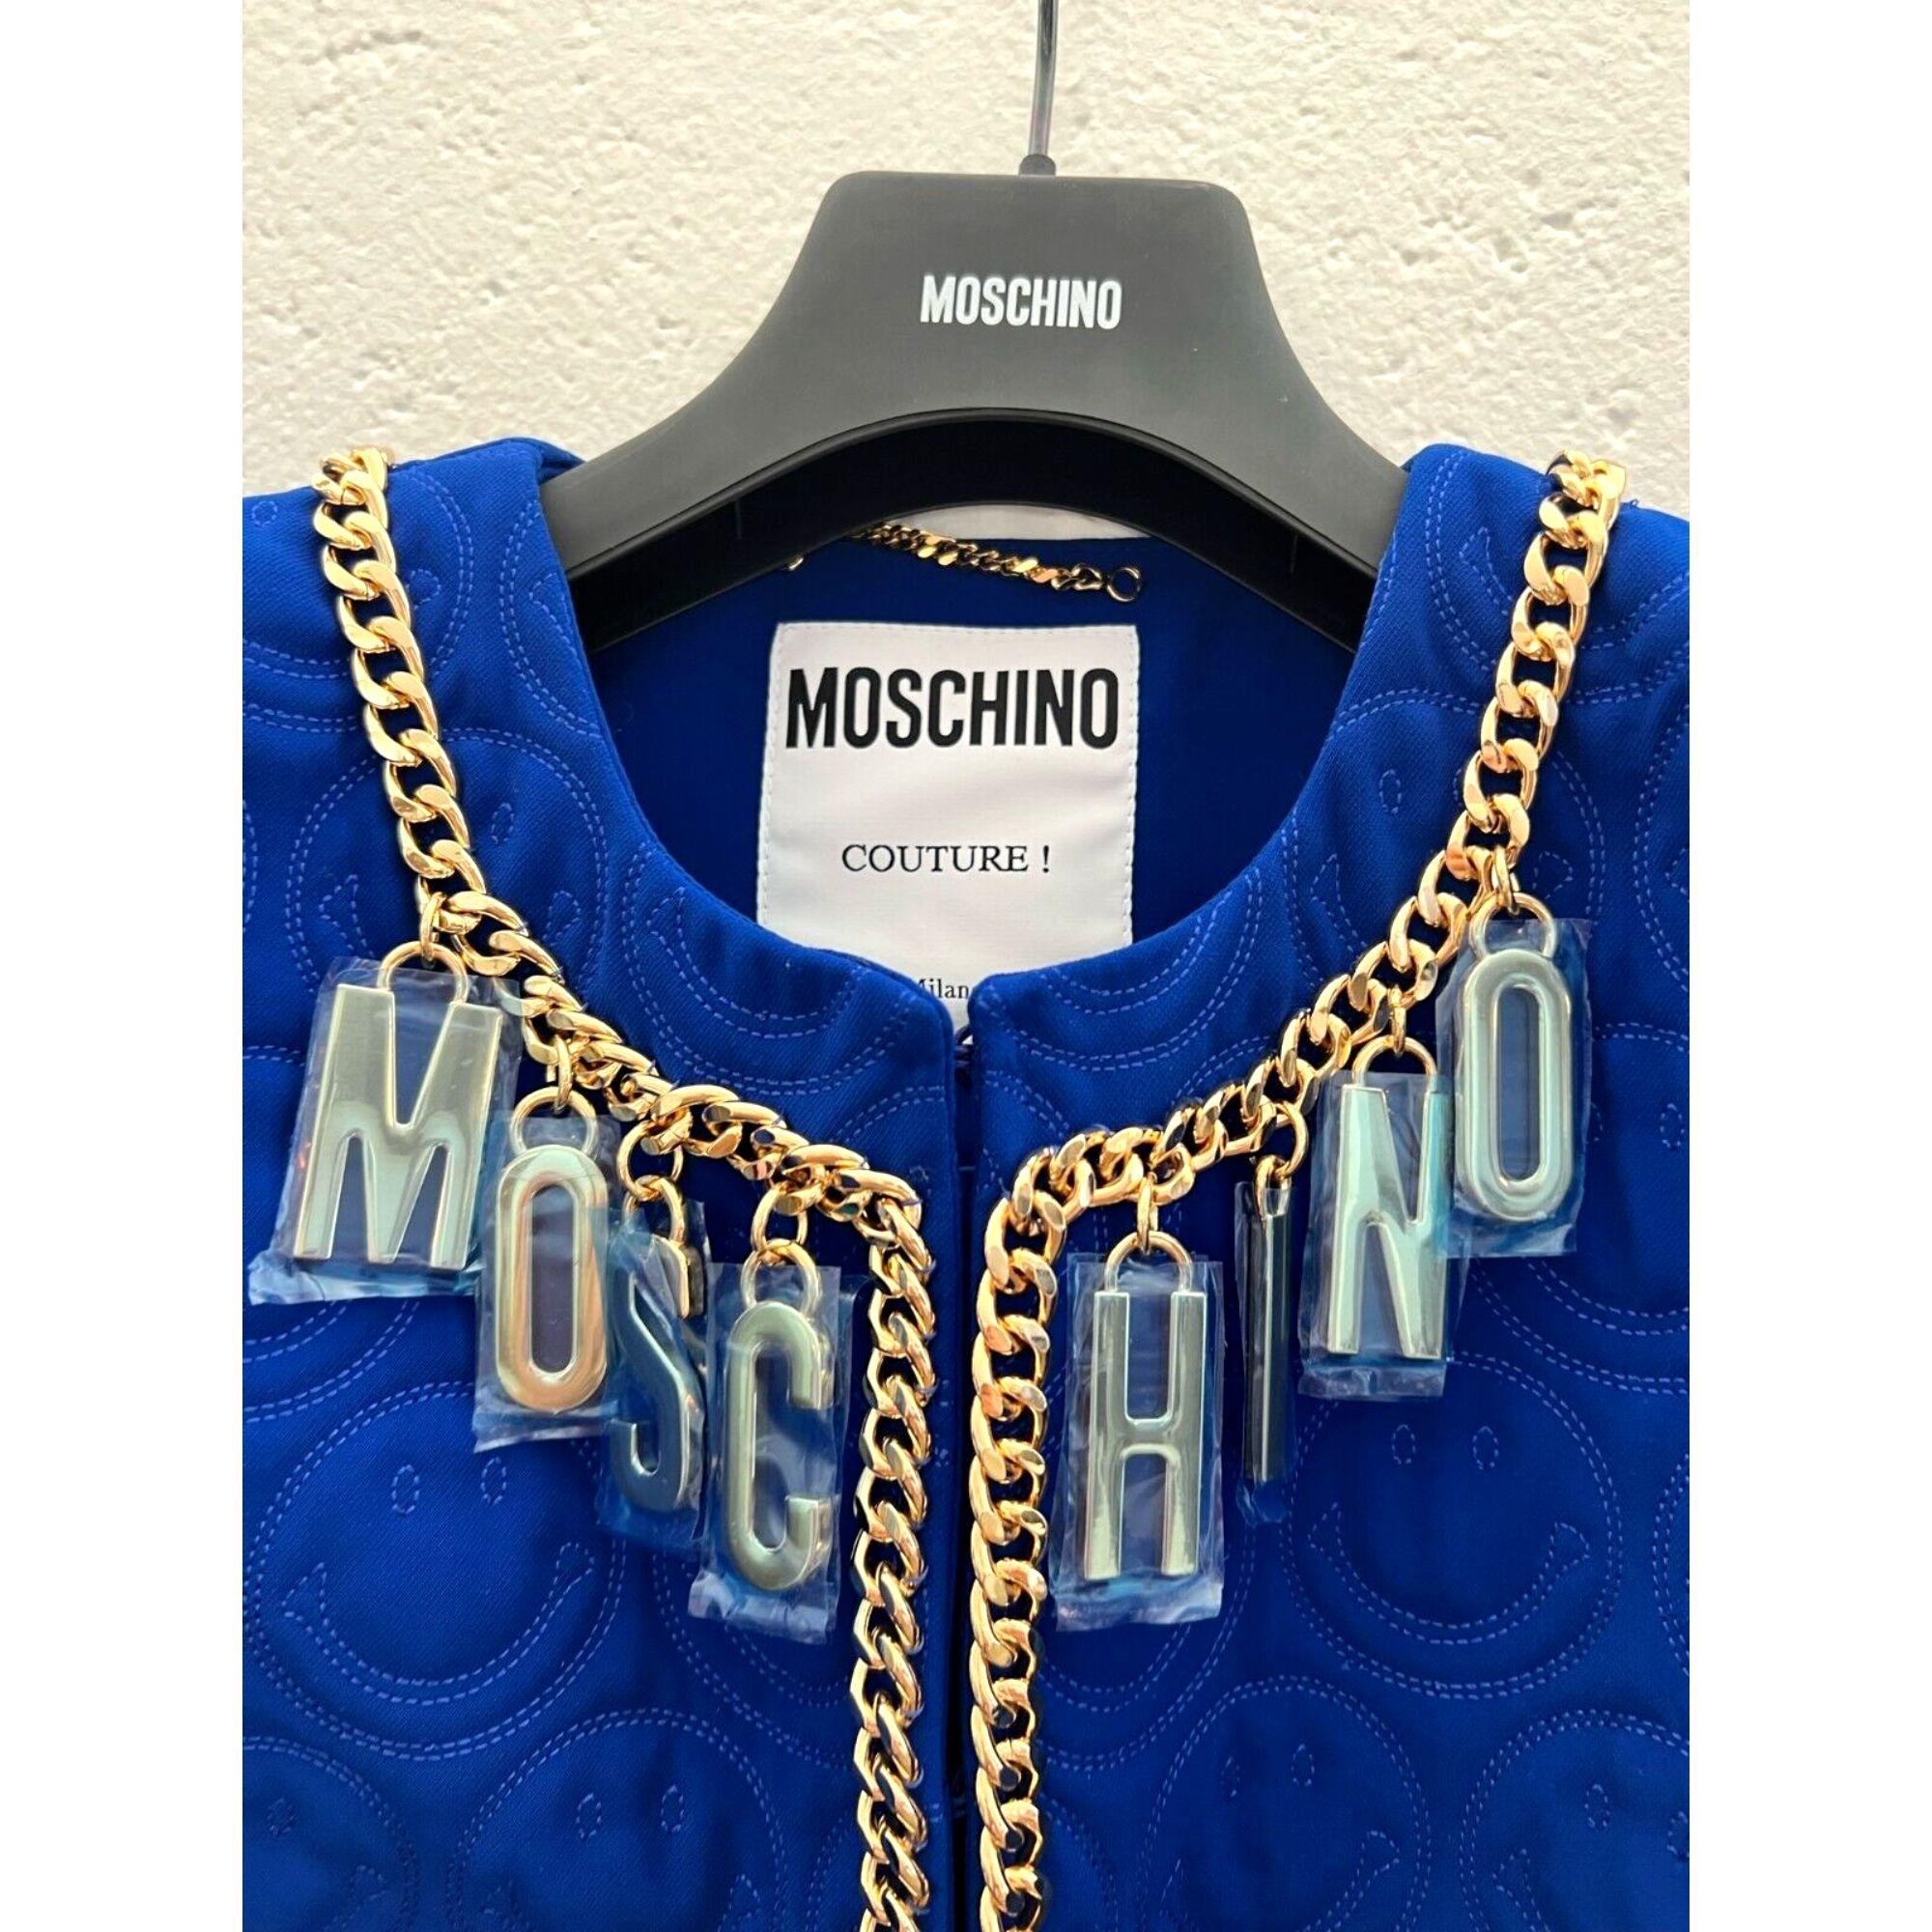 SS21 Moschino Couture Jeremy Scott BlueBlazer AllOver Stitched Smiley Face

Additional Information:
Material: 94% CU Rayon, 6% EA
Color: Blue
Size: IT 46 / US 12
Pattern: Allover, Smiley Face
Style: Blazer
Dimensions: Shoulder to shoulder 17